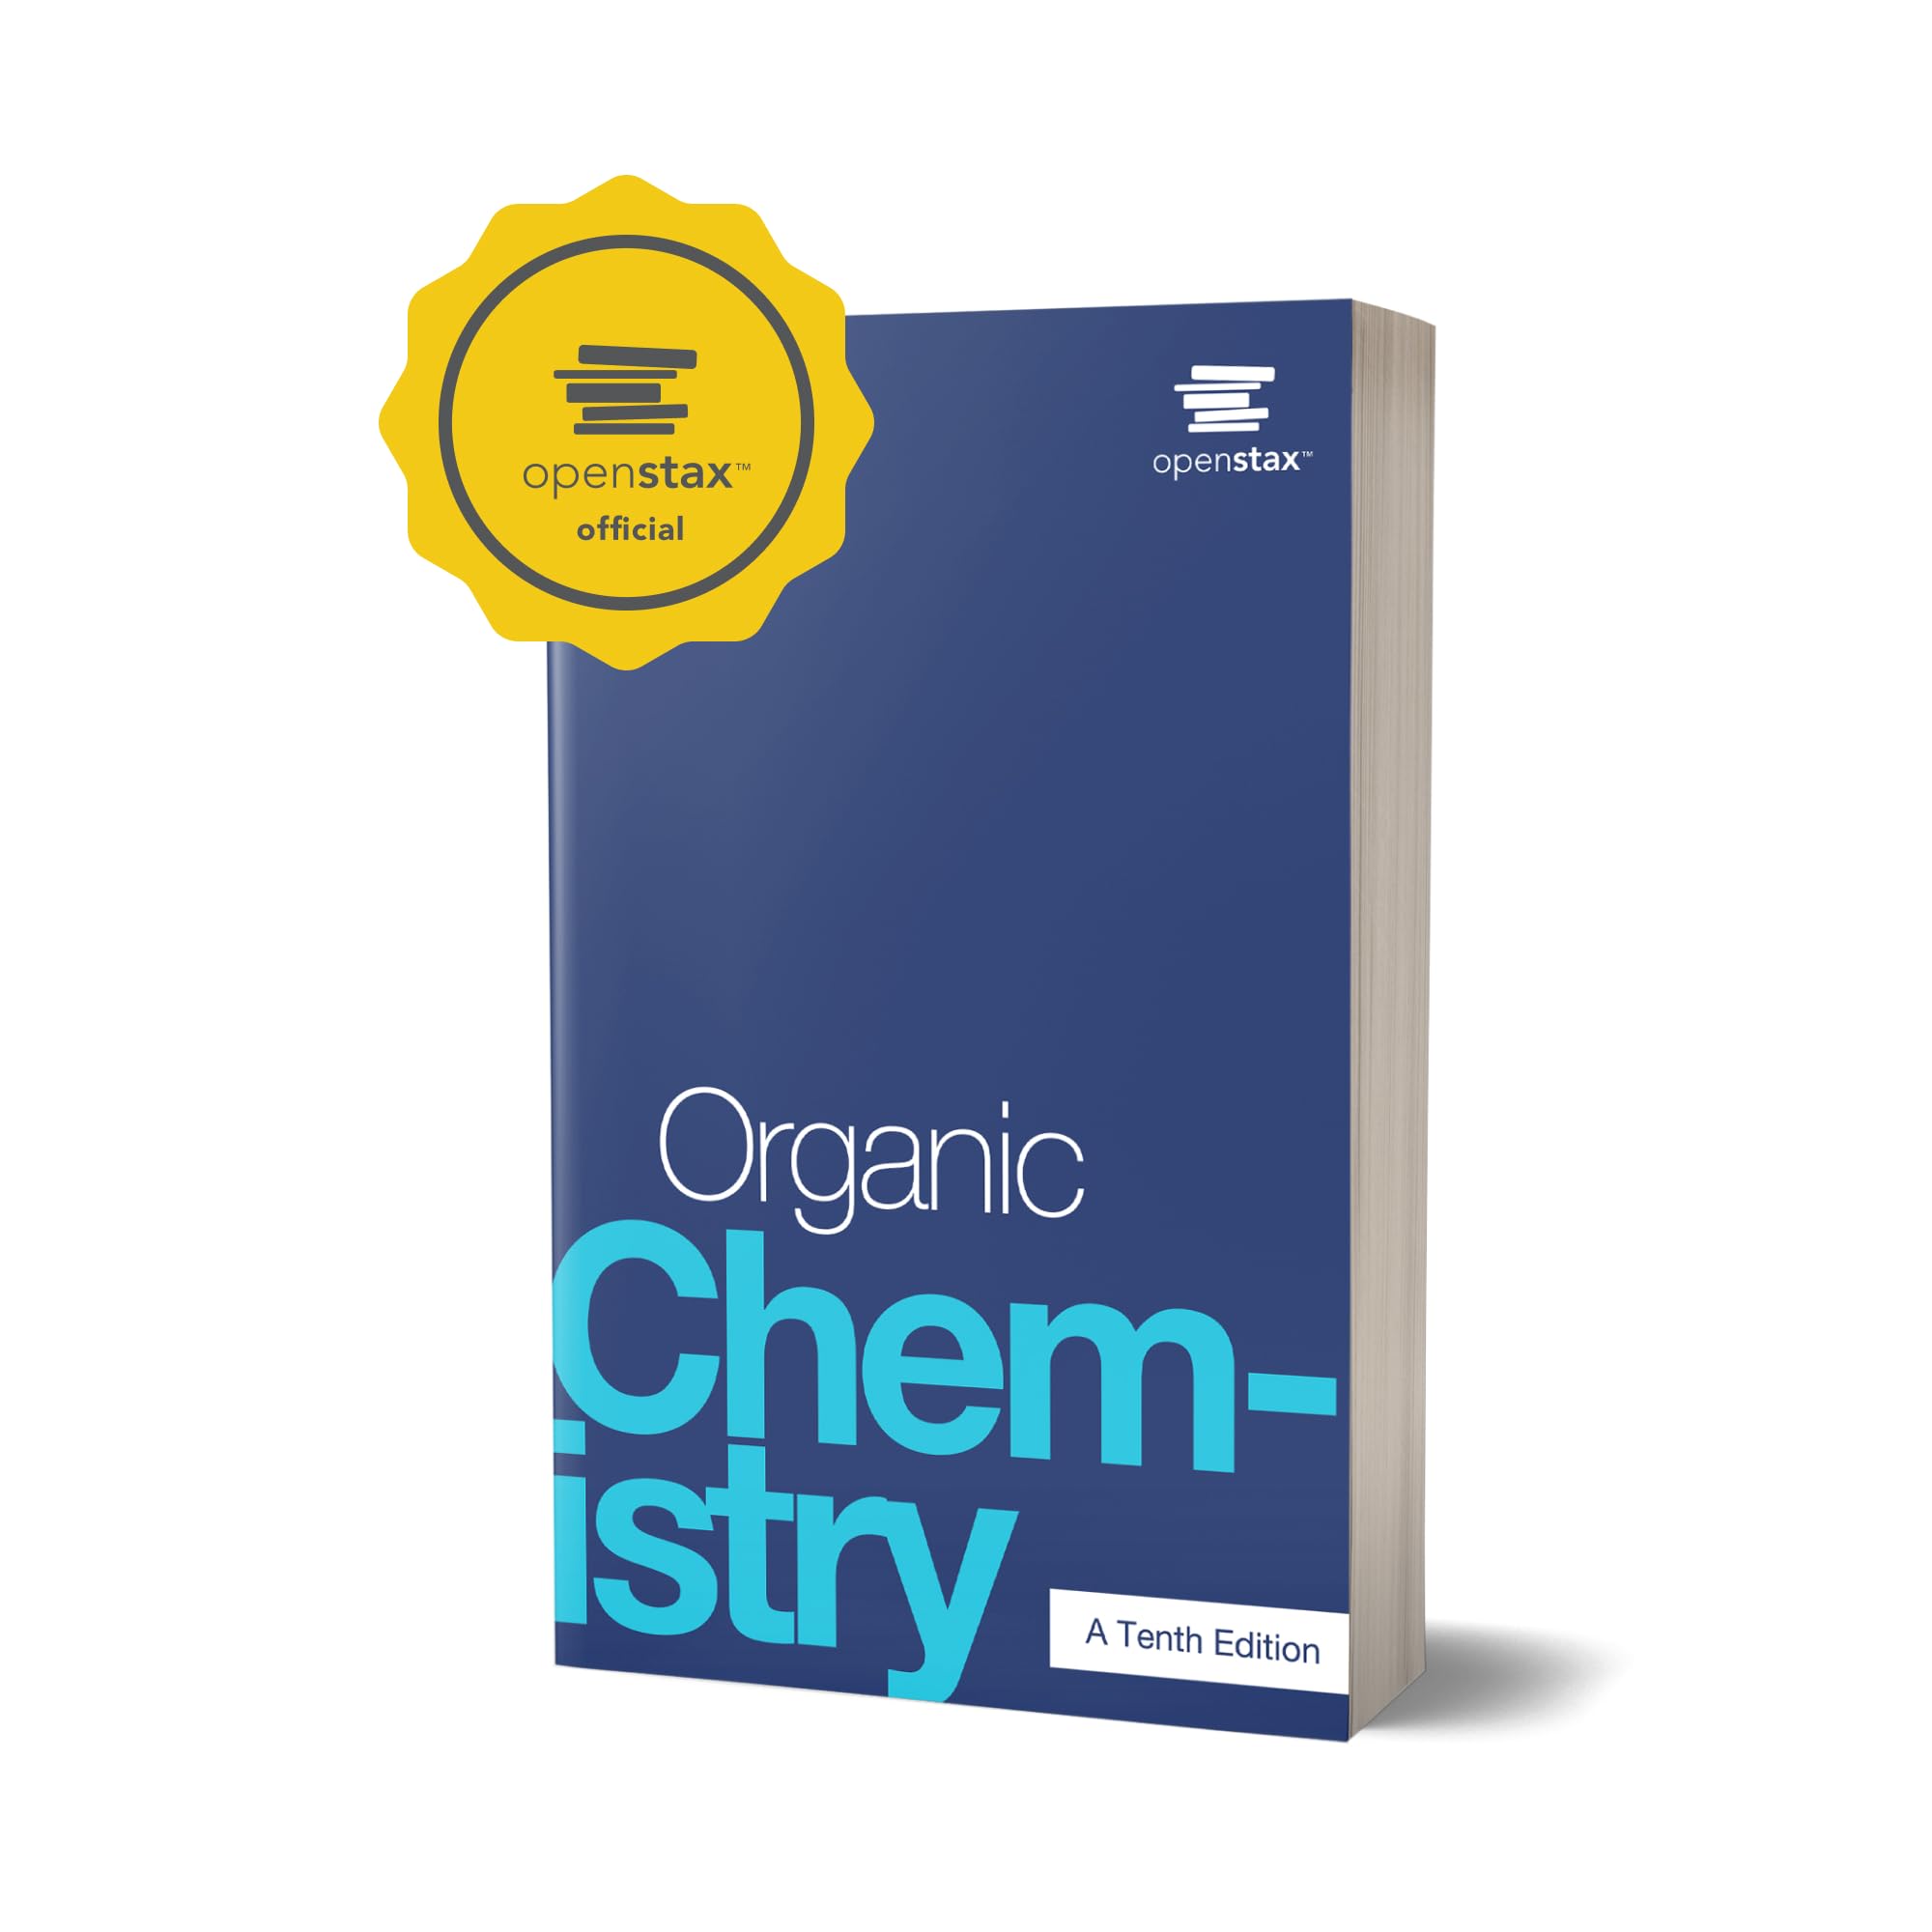 Organic Chemistry: Official OpenStax [hardcover, full color]